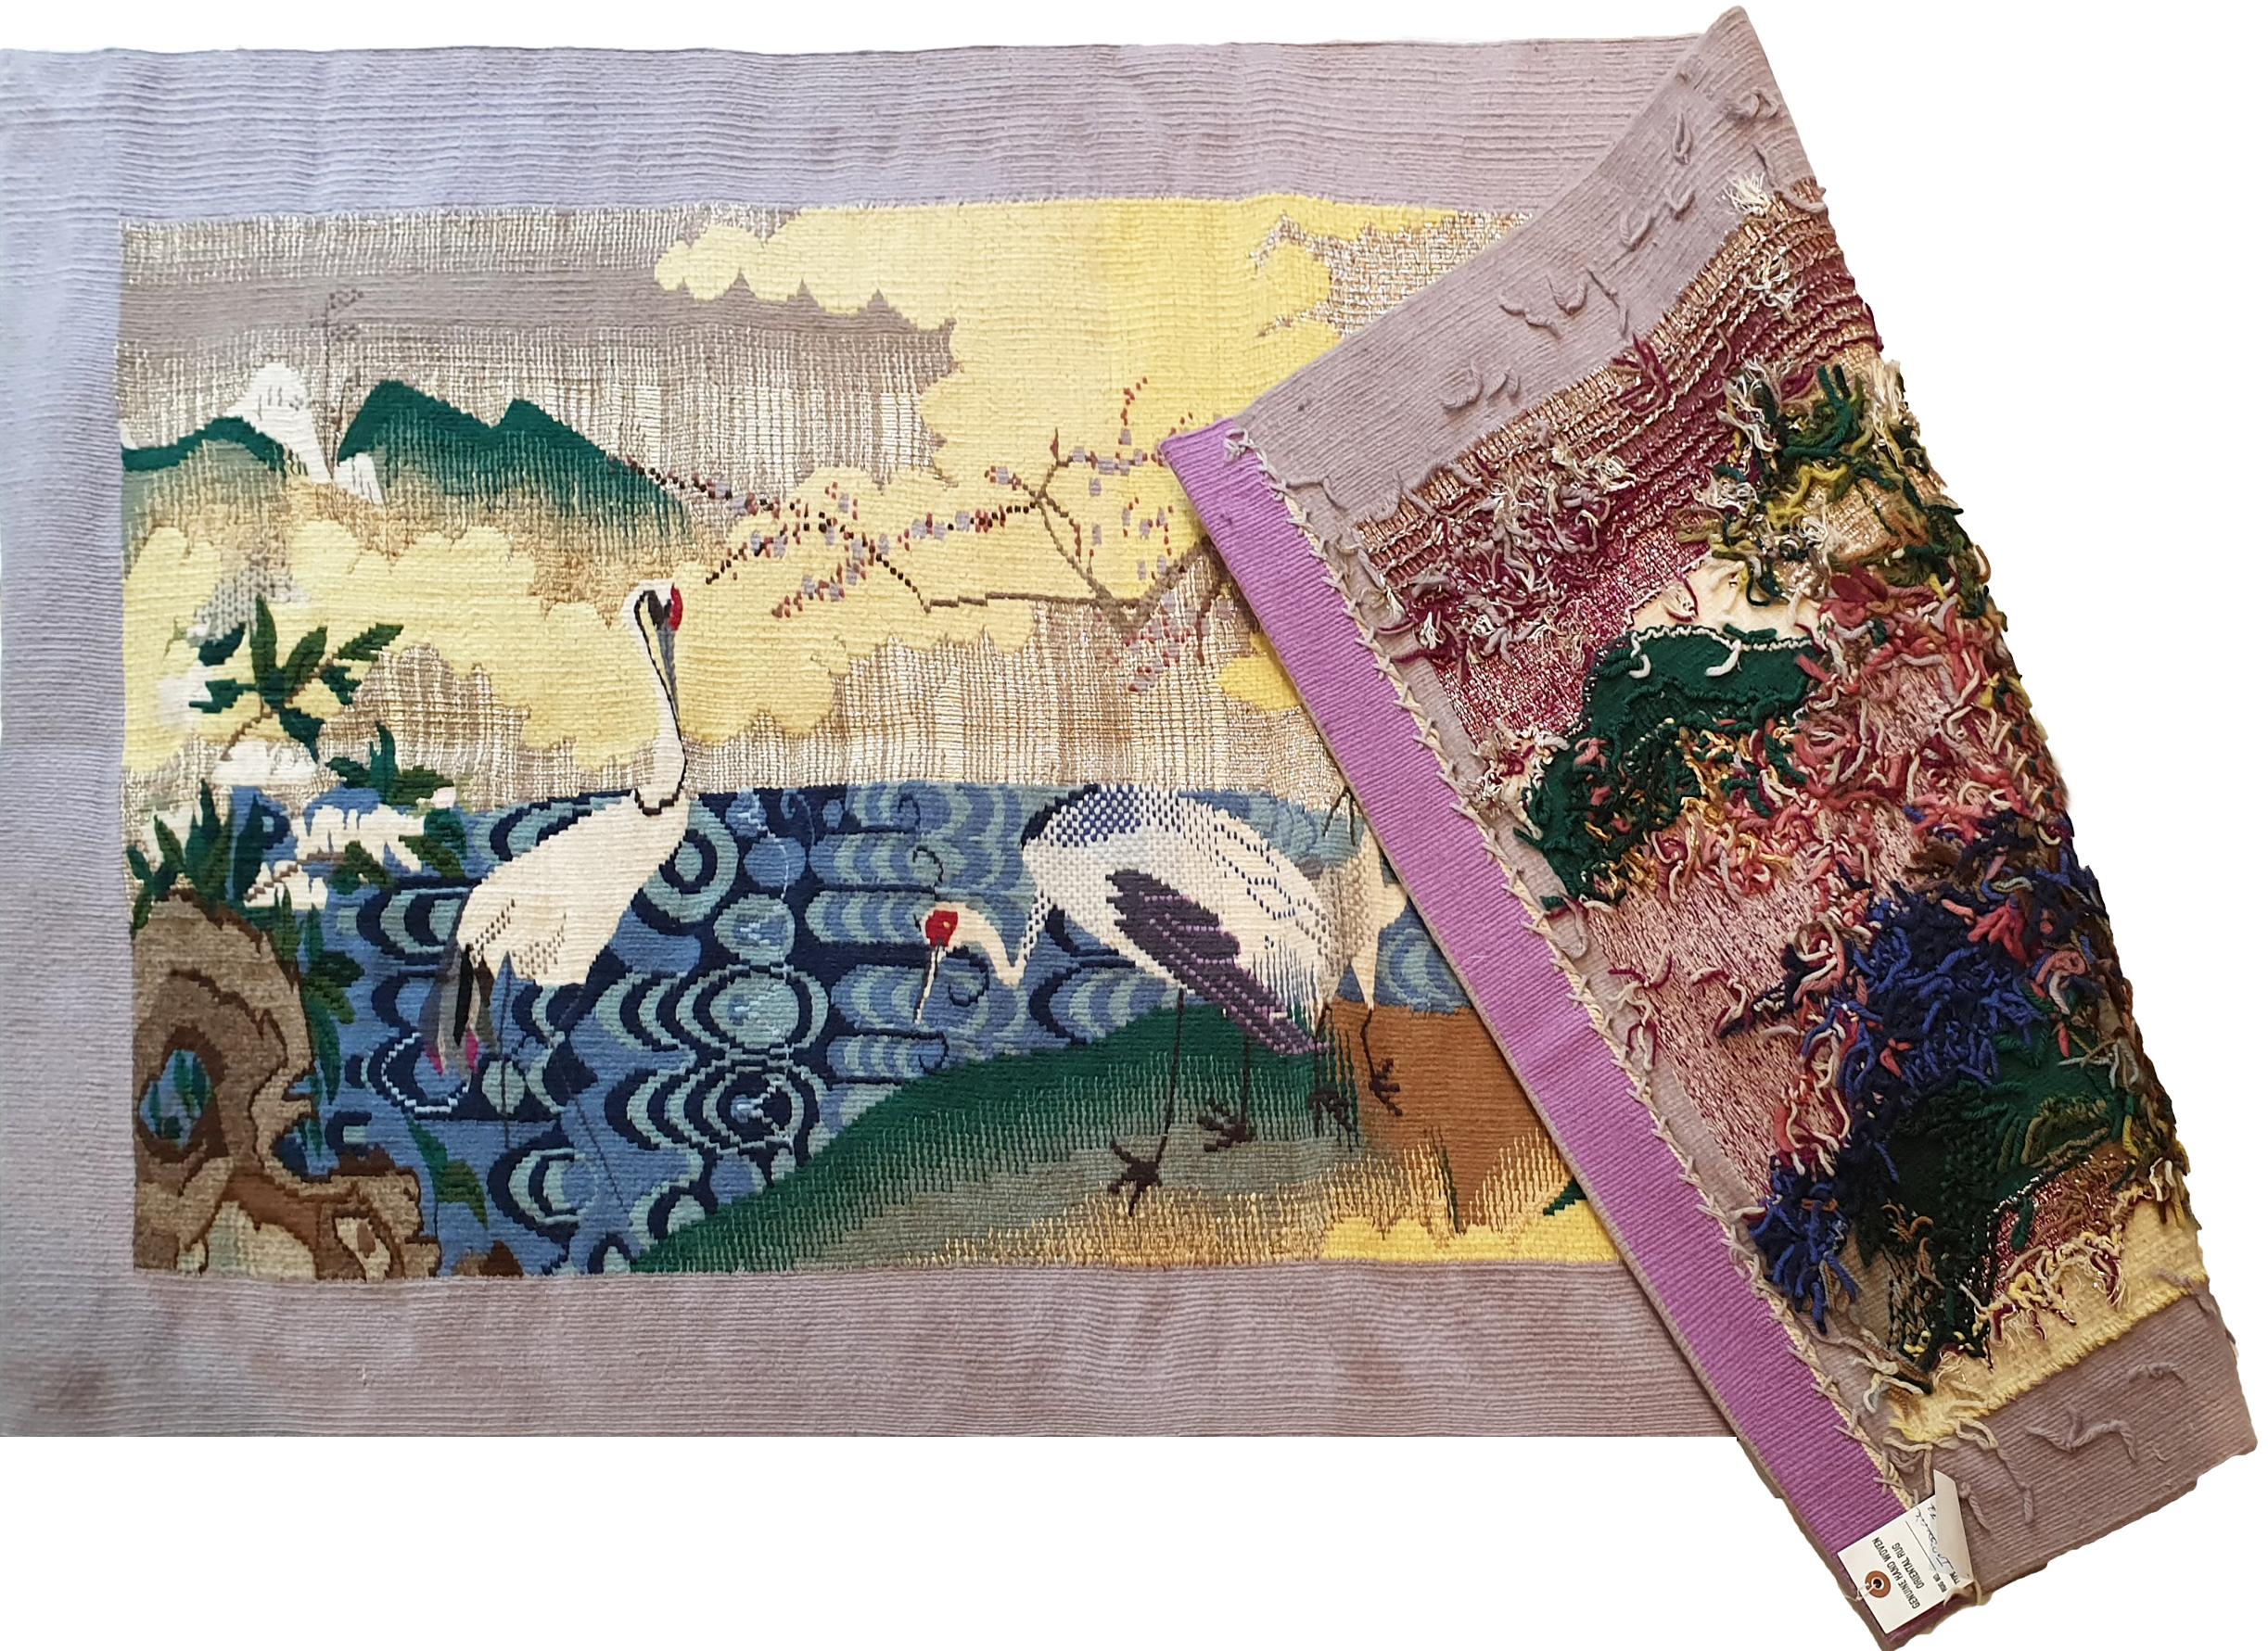  Tapestry of the 20th Century - N° 766 In Excellent Condition For Sale In Paris, FR